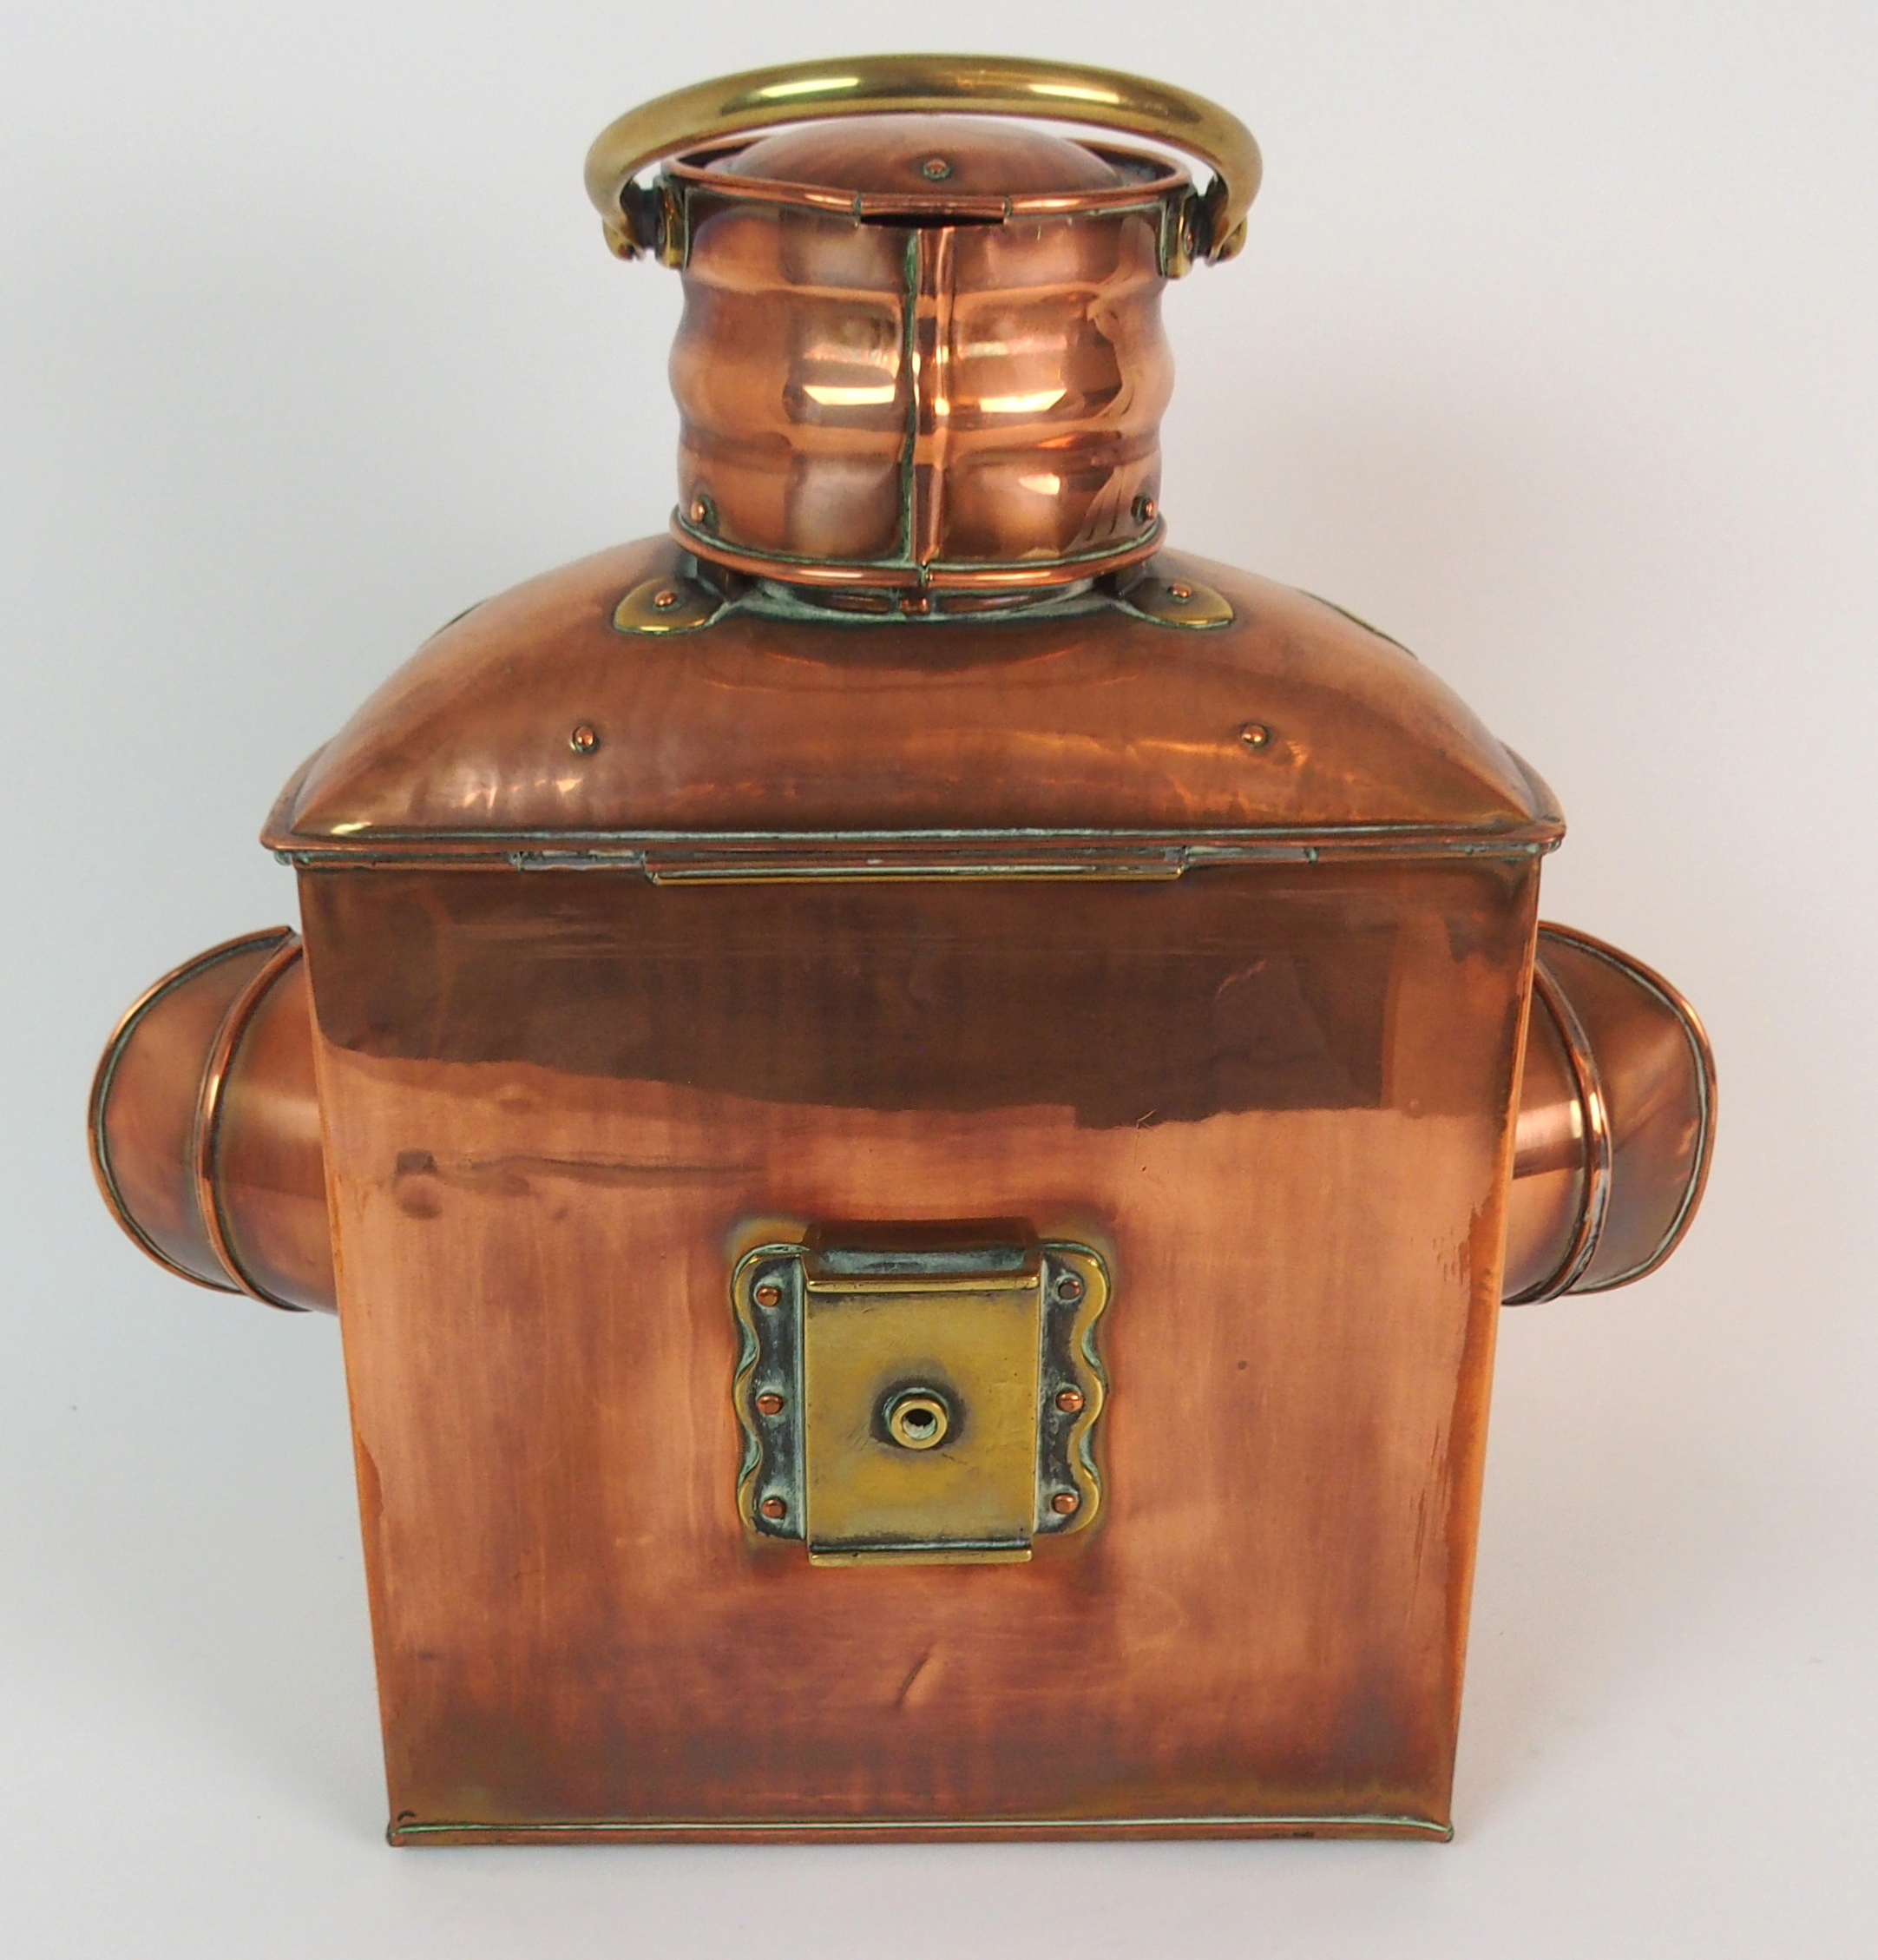 A VICTORIAN COPPER PORT & STARBOARD SHIPS LANTERN with hinged top and swing handle, with interior - Image 10 of 10